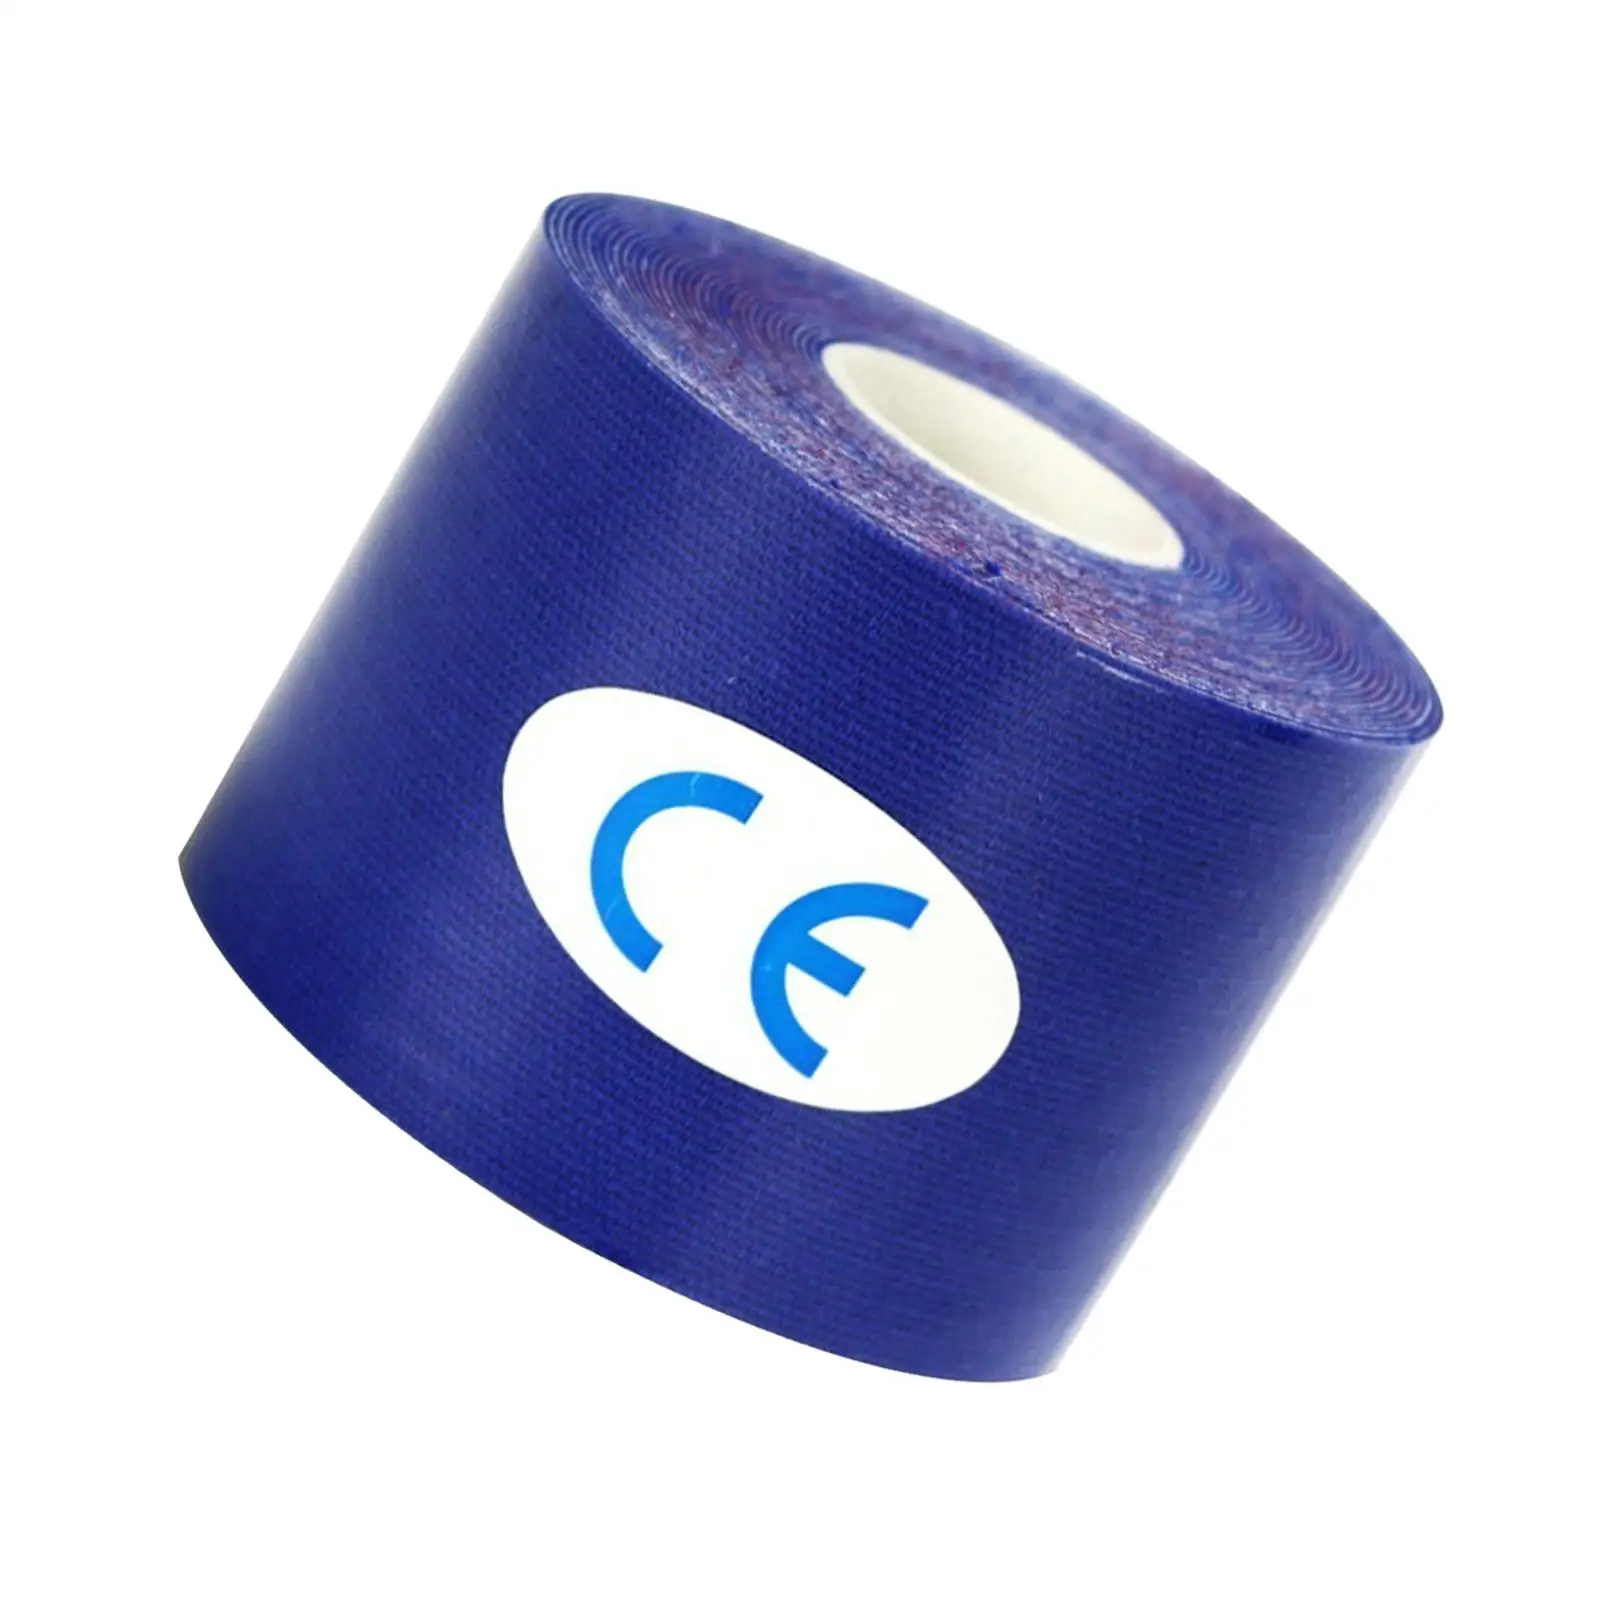 Athletic Tape Protective Tape 16 Feet No Sticky Residue Muscle Support Sports Wrap Tape for Joint Body Knee Shoulder Football